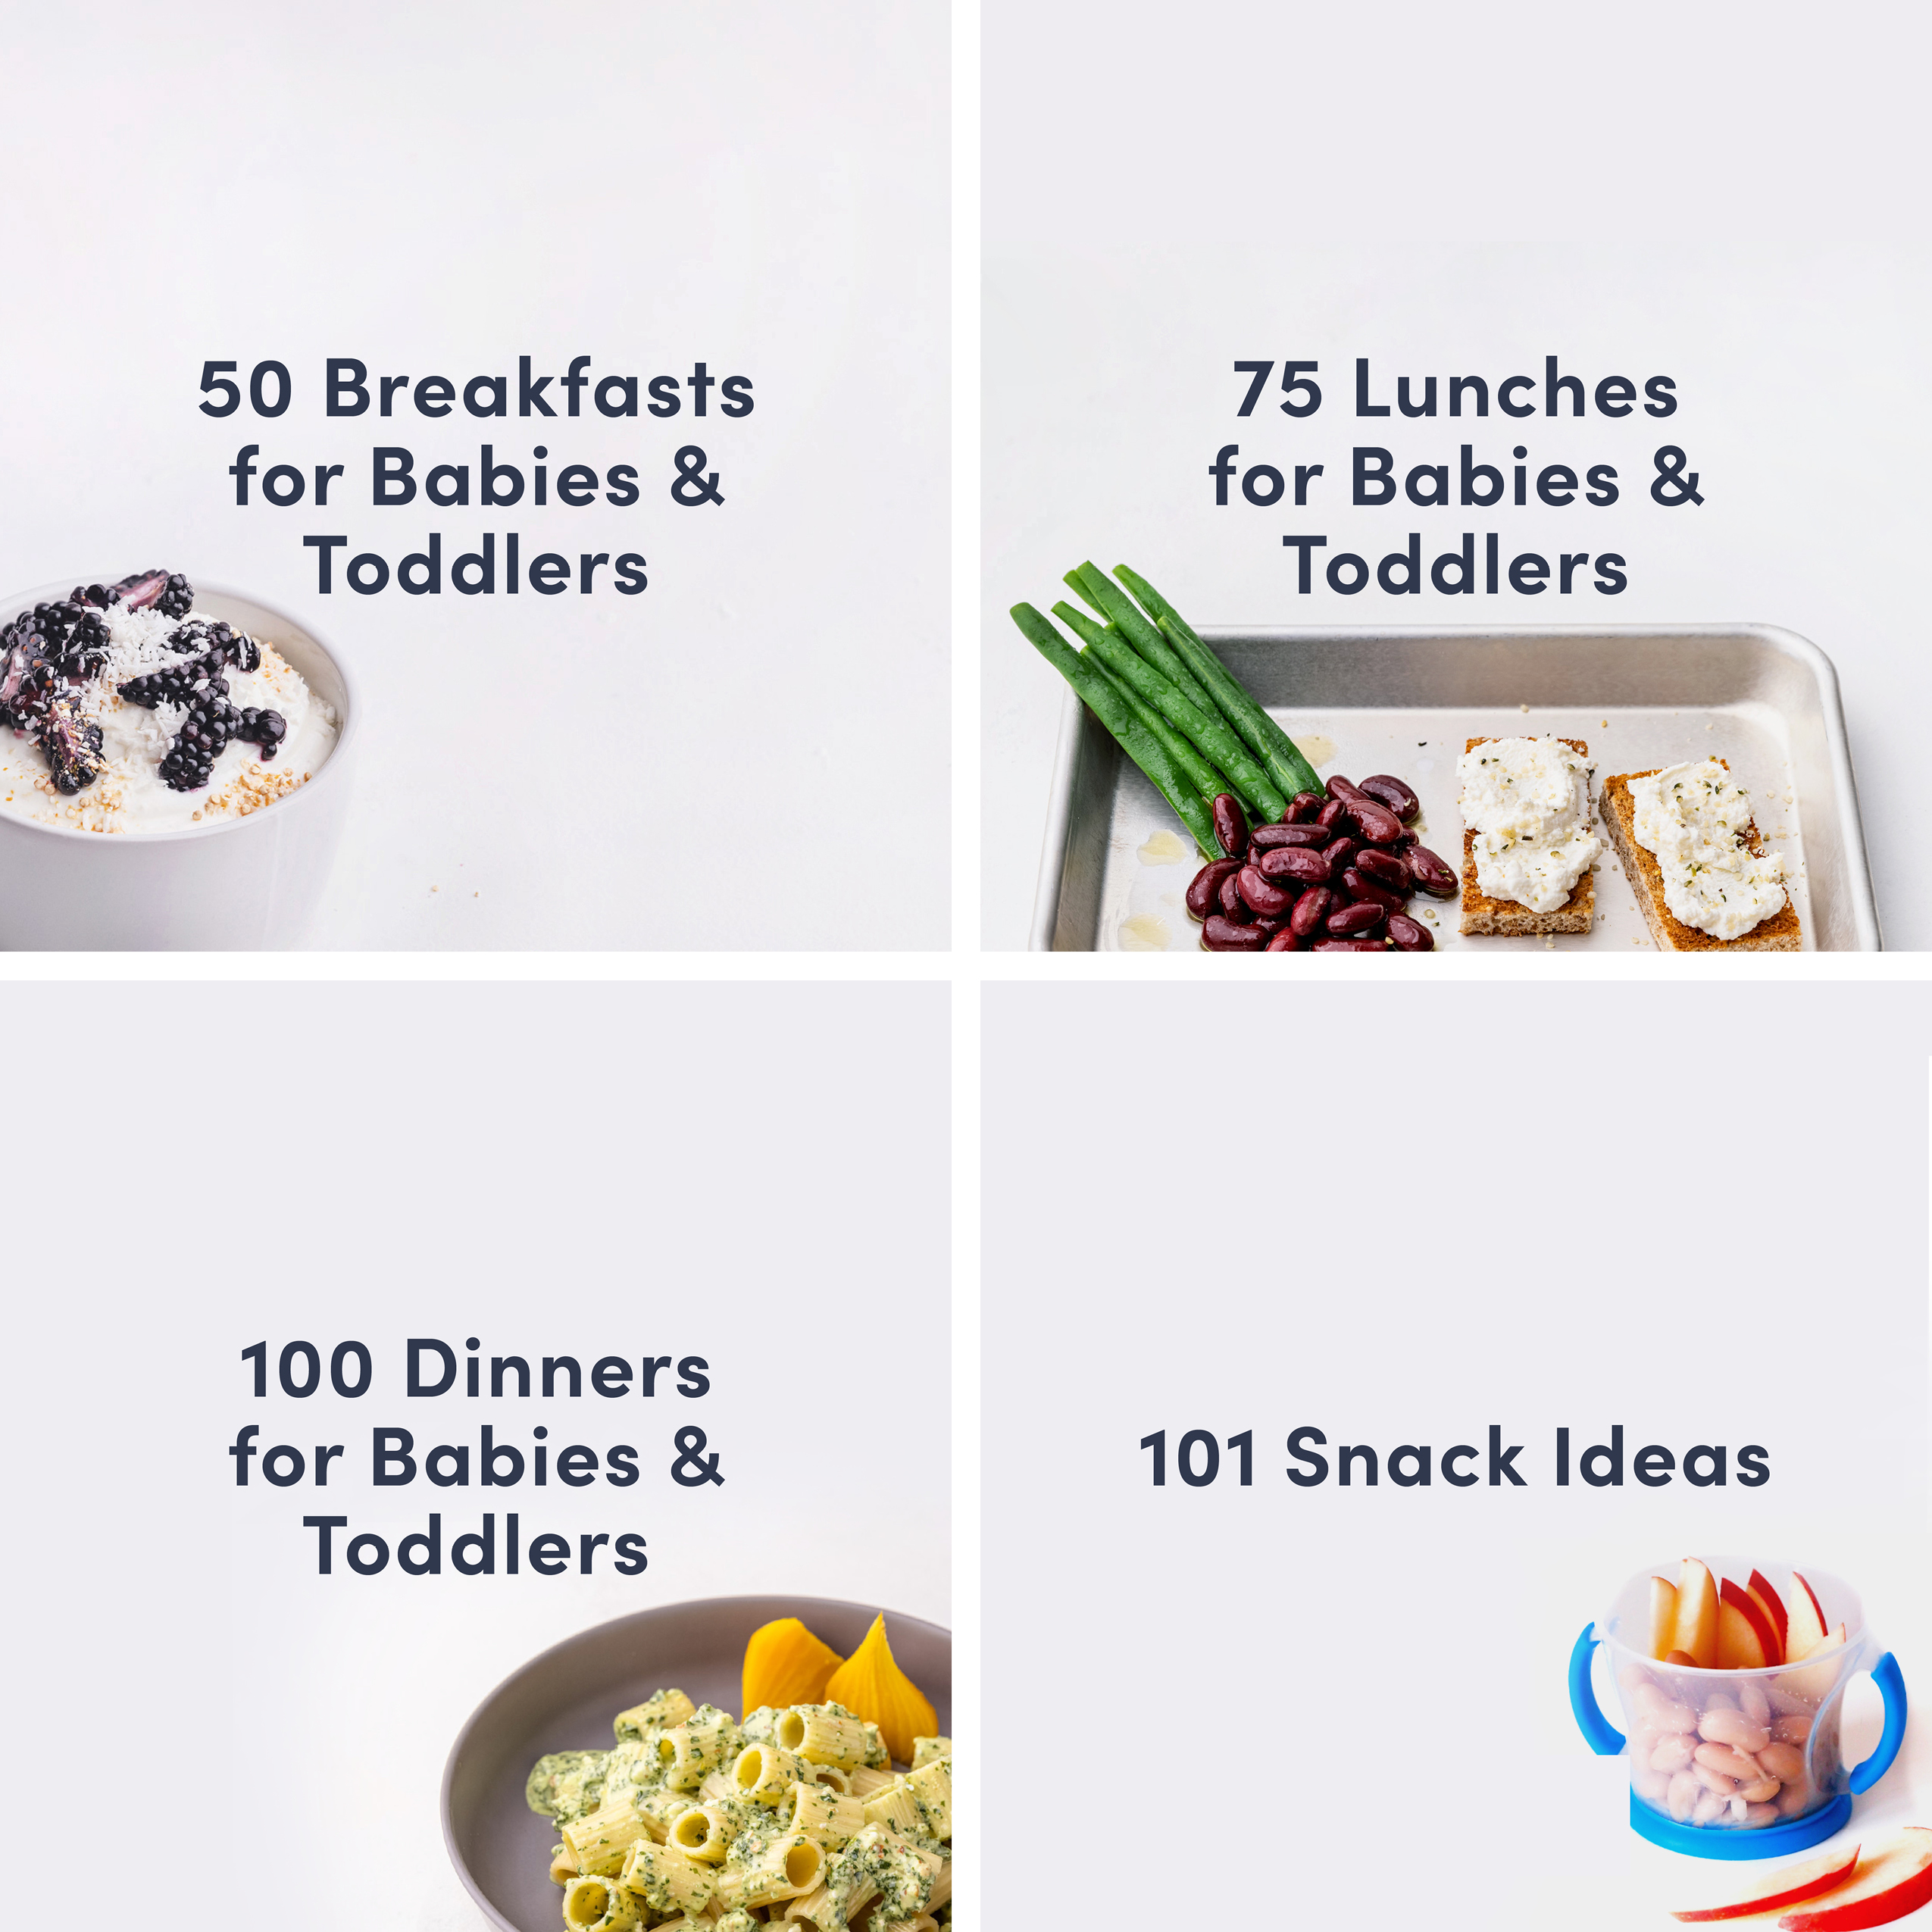 Milk FAQs for Babies & Toddlers - First Foods - Solid Starts